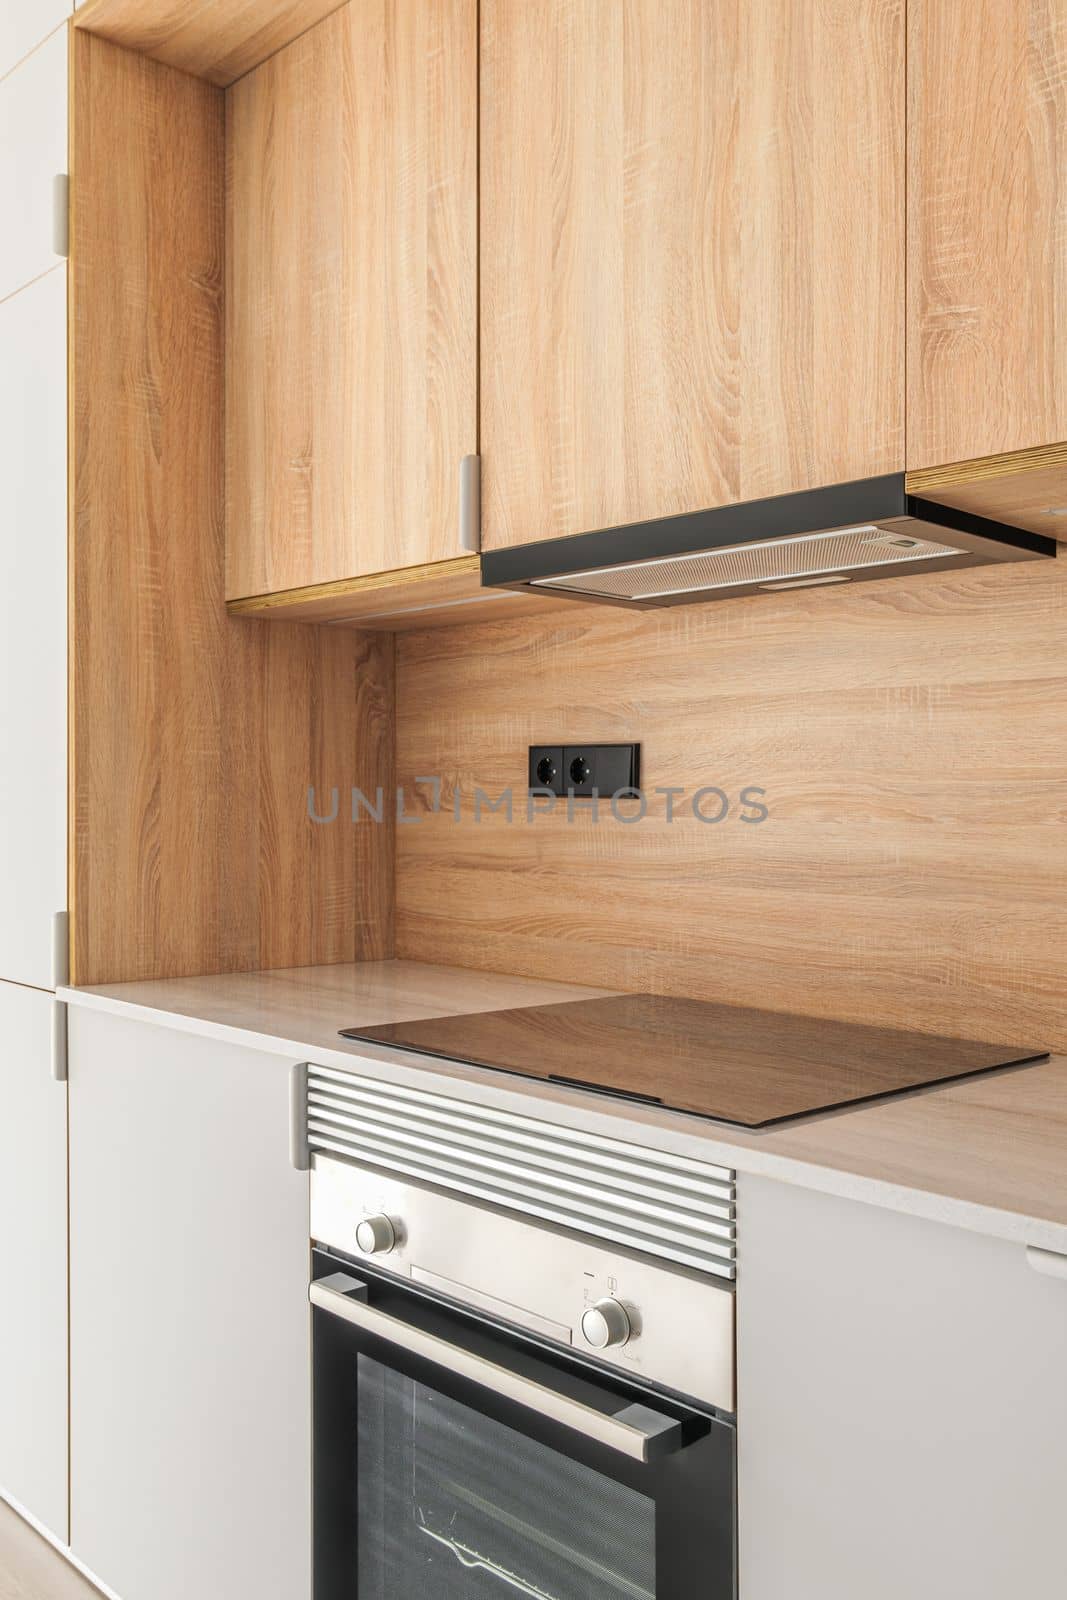 Closeup of piece of modular kitchen furniture made of wood. Modern cozy kitchen interior with appliances built into marble countertop. Hood hidden from view in cabinet above stove and oven